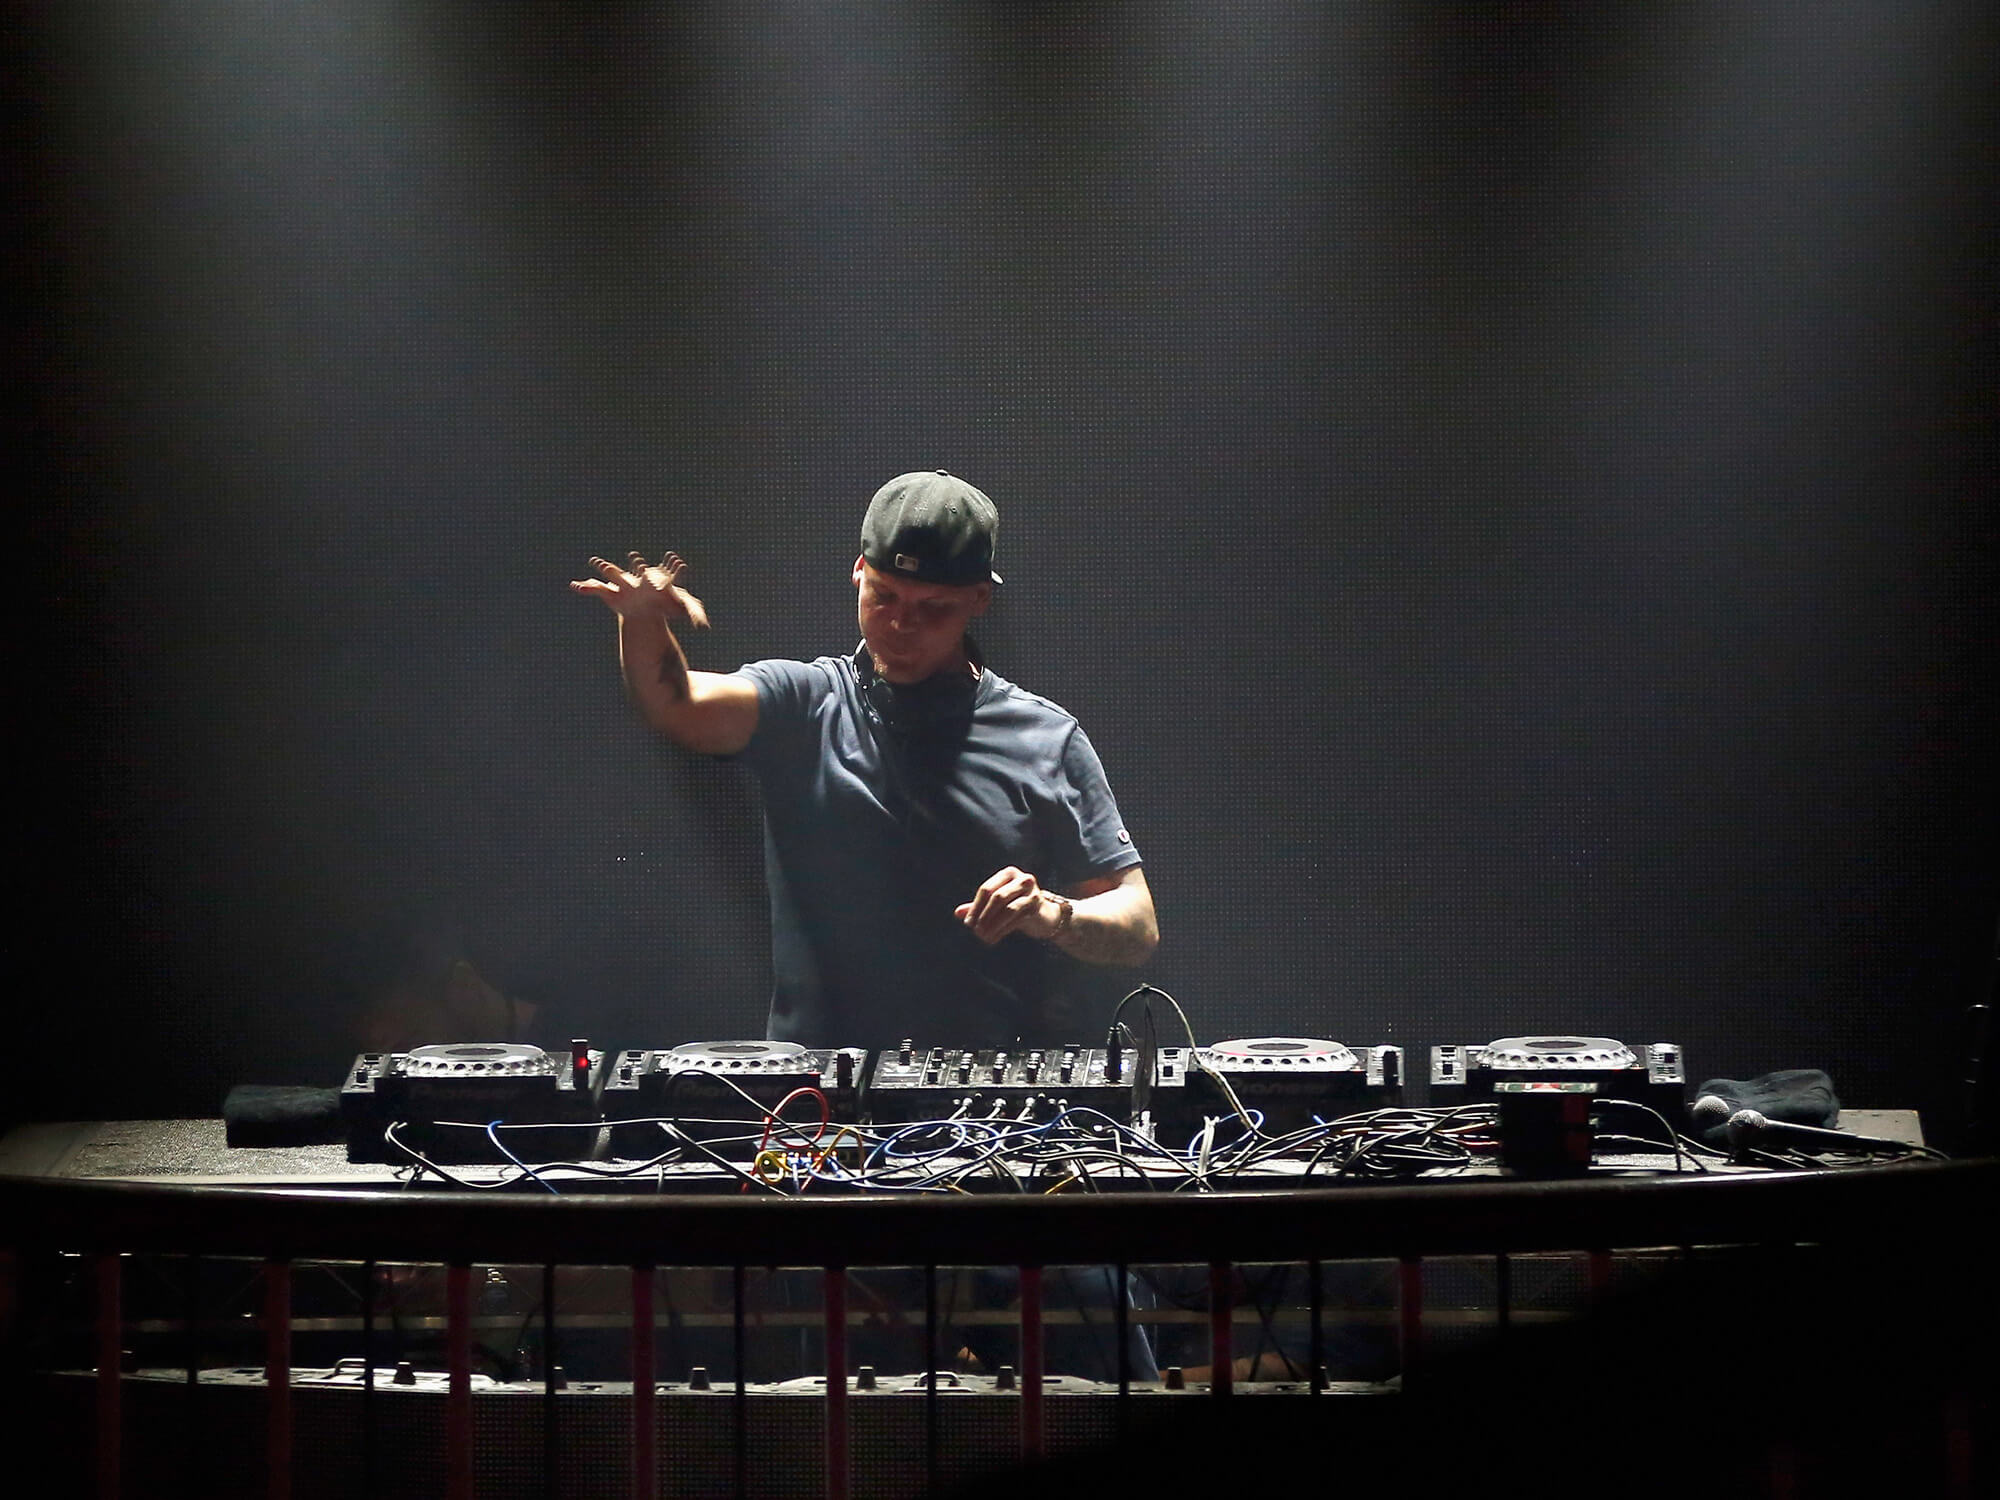 Avicii on stage in 2016. He is wearing a t-shirt and cap and has one hand hovering above the deck. White lighting shines down on him.